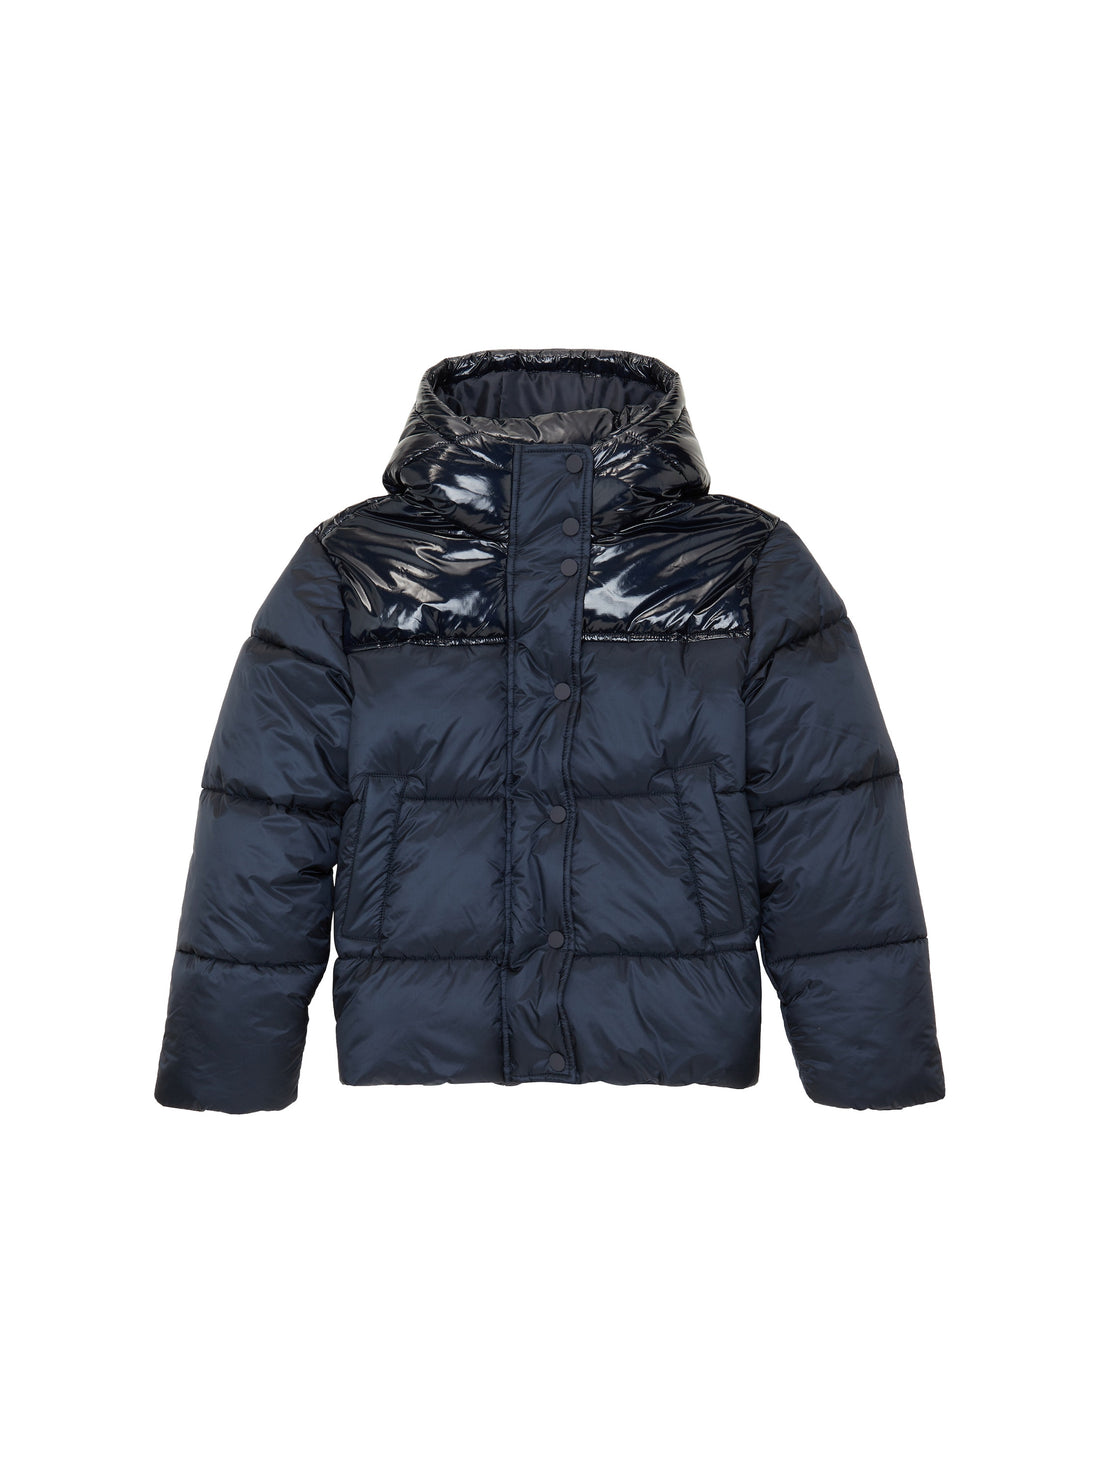 Puffer Jacket With Hood_1038493_10668_01